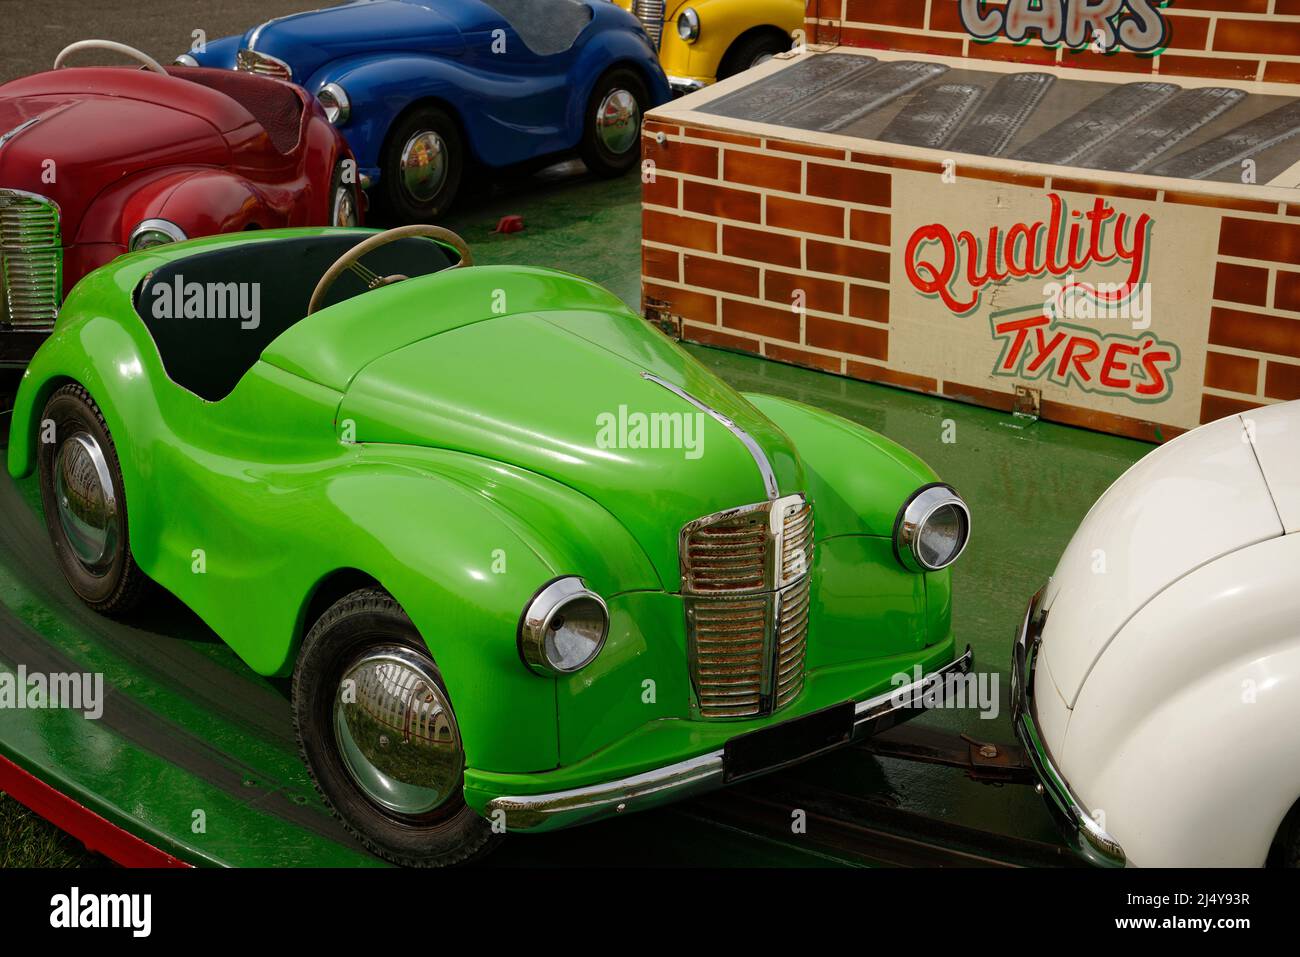 A fairground ride for children. Small 'cars' to steer and pretend to drive. Stock Photo